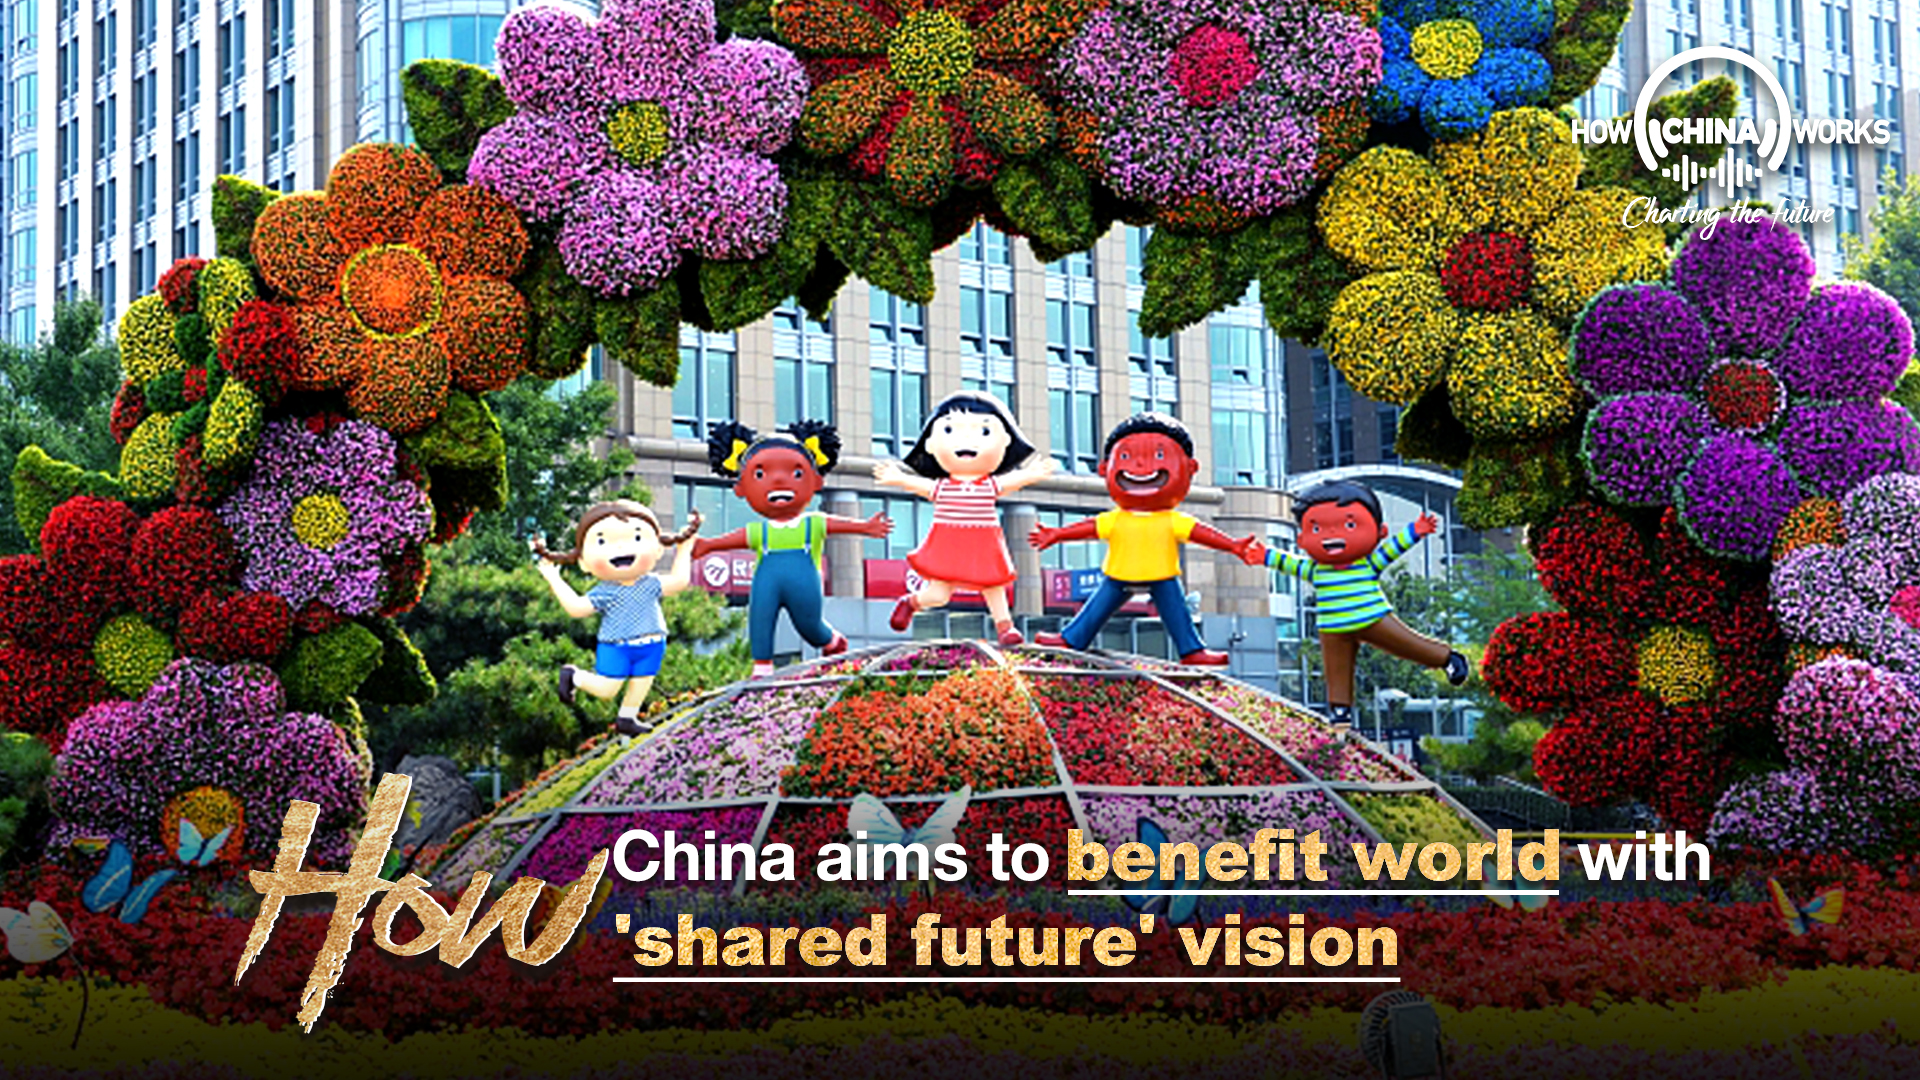 How China aims to benefit world with 'shared future' vision